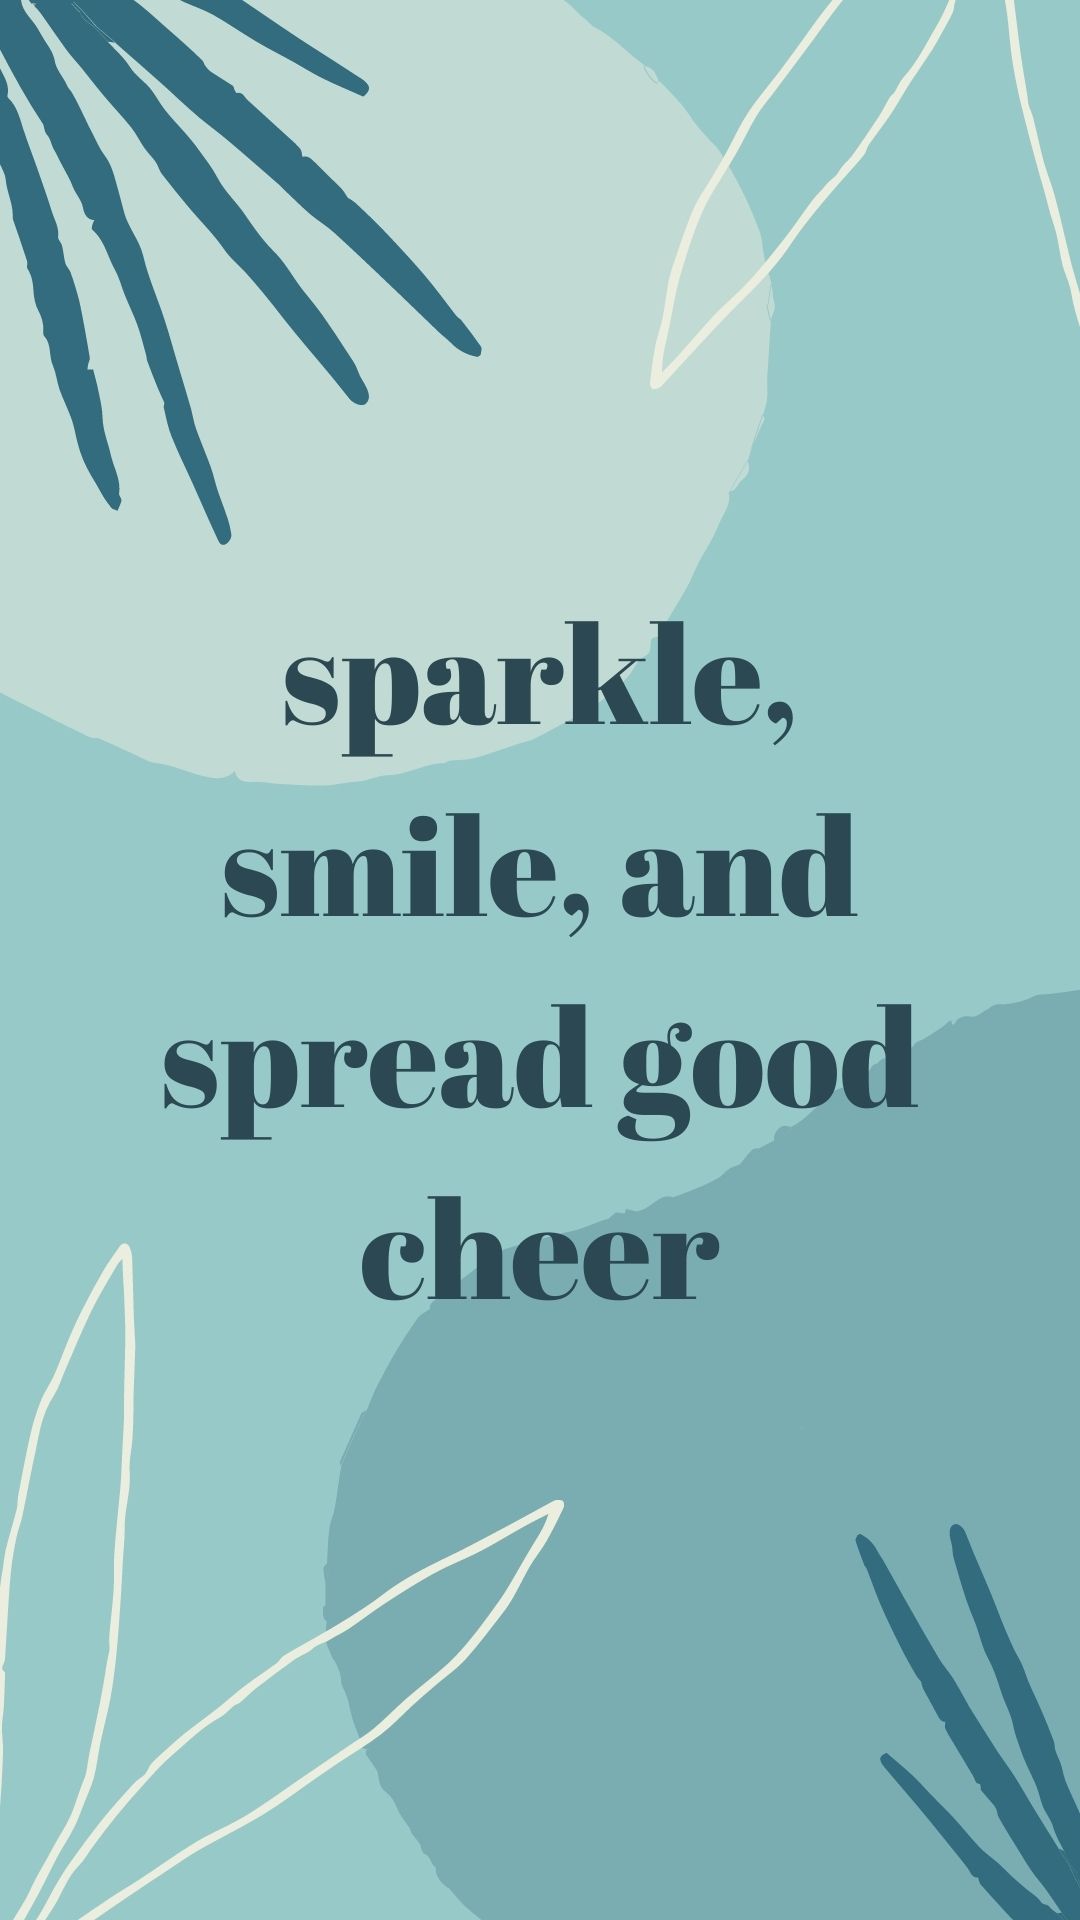 sparkle, smile, and spread good cheer